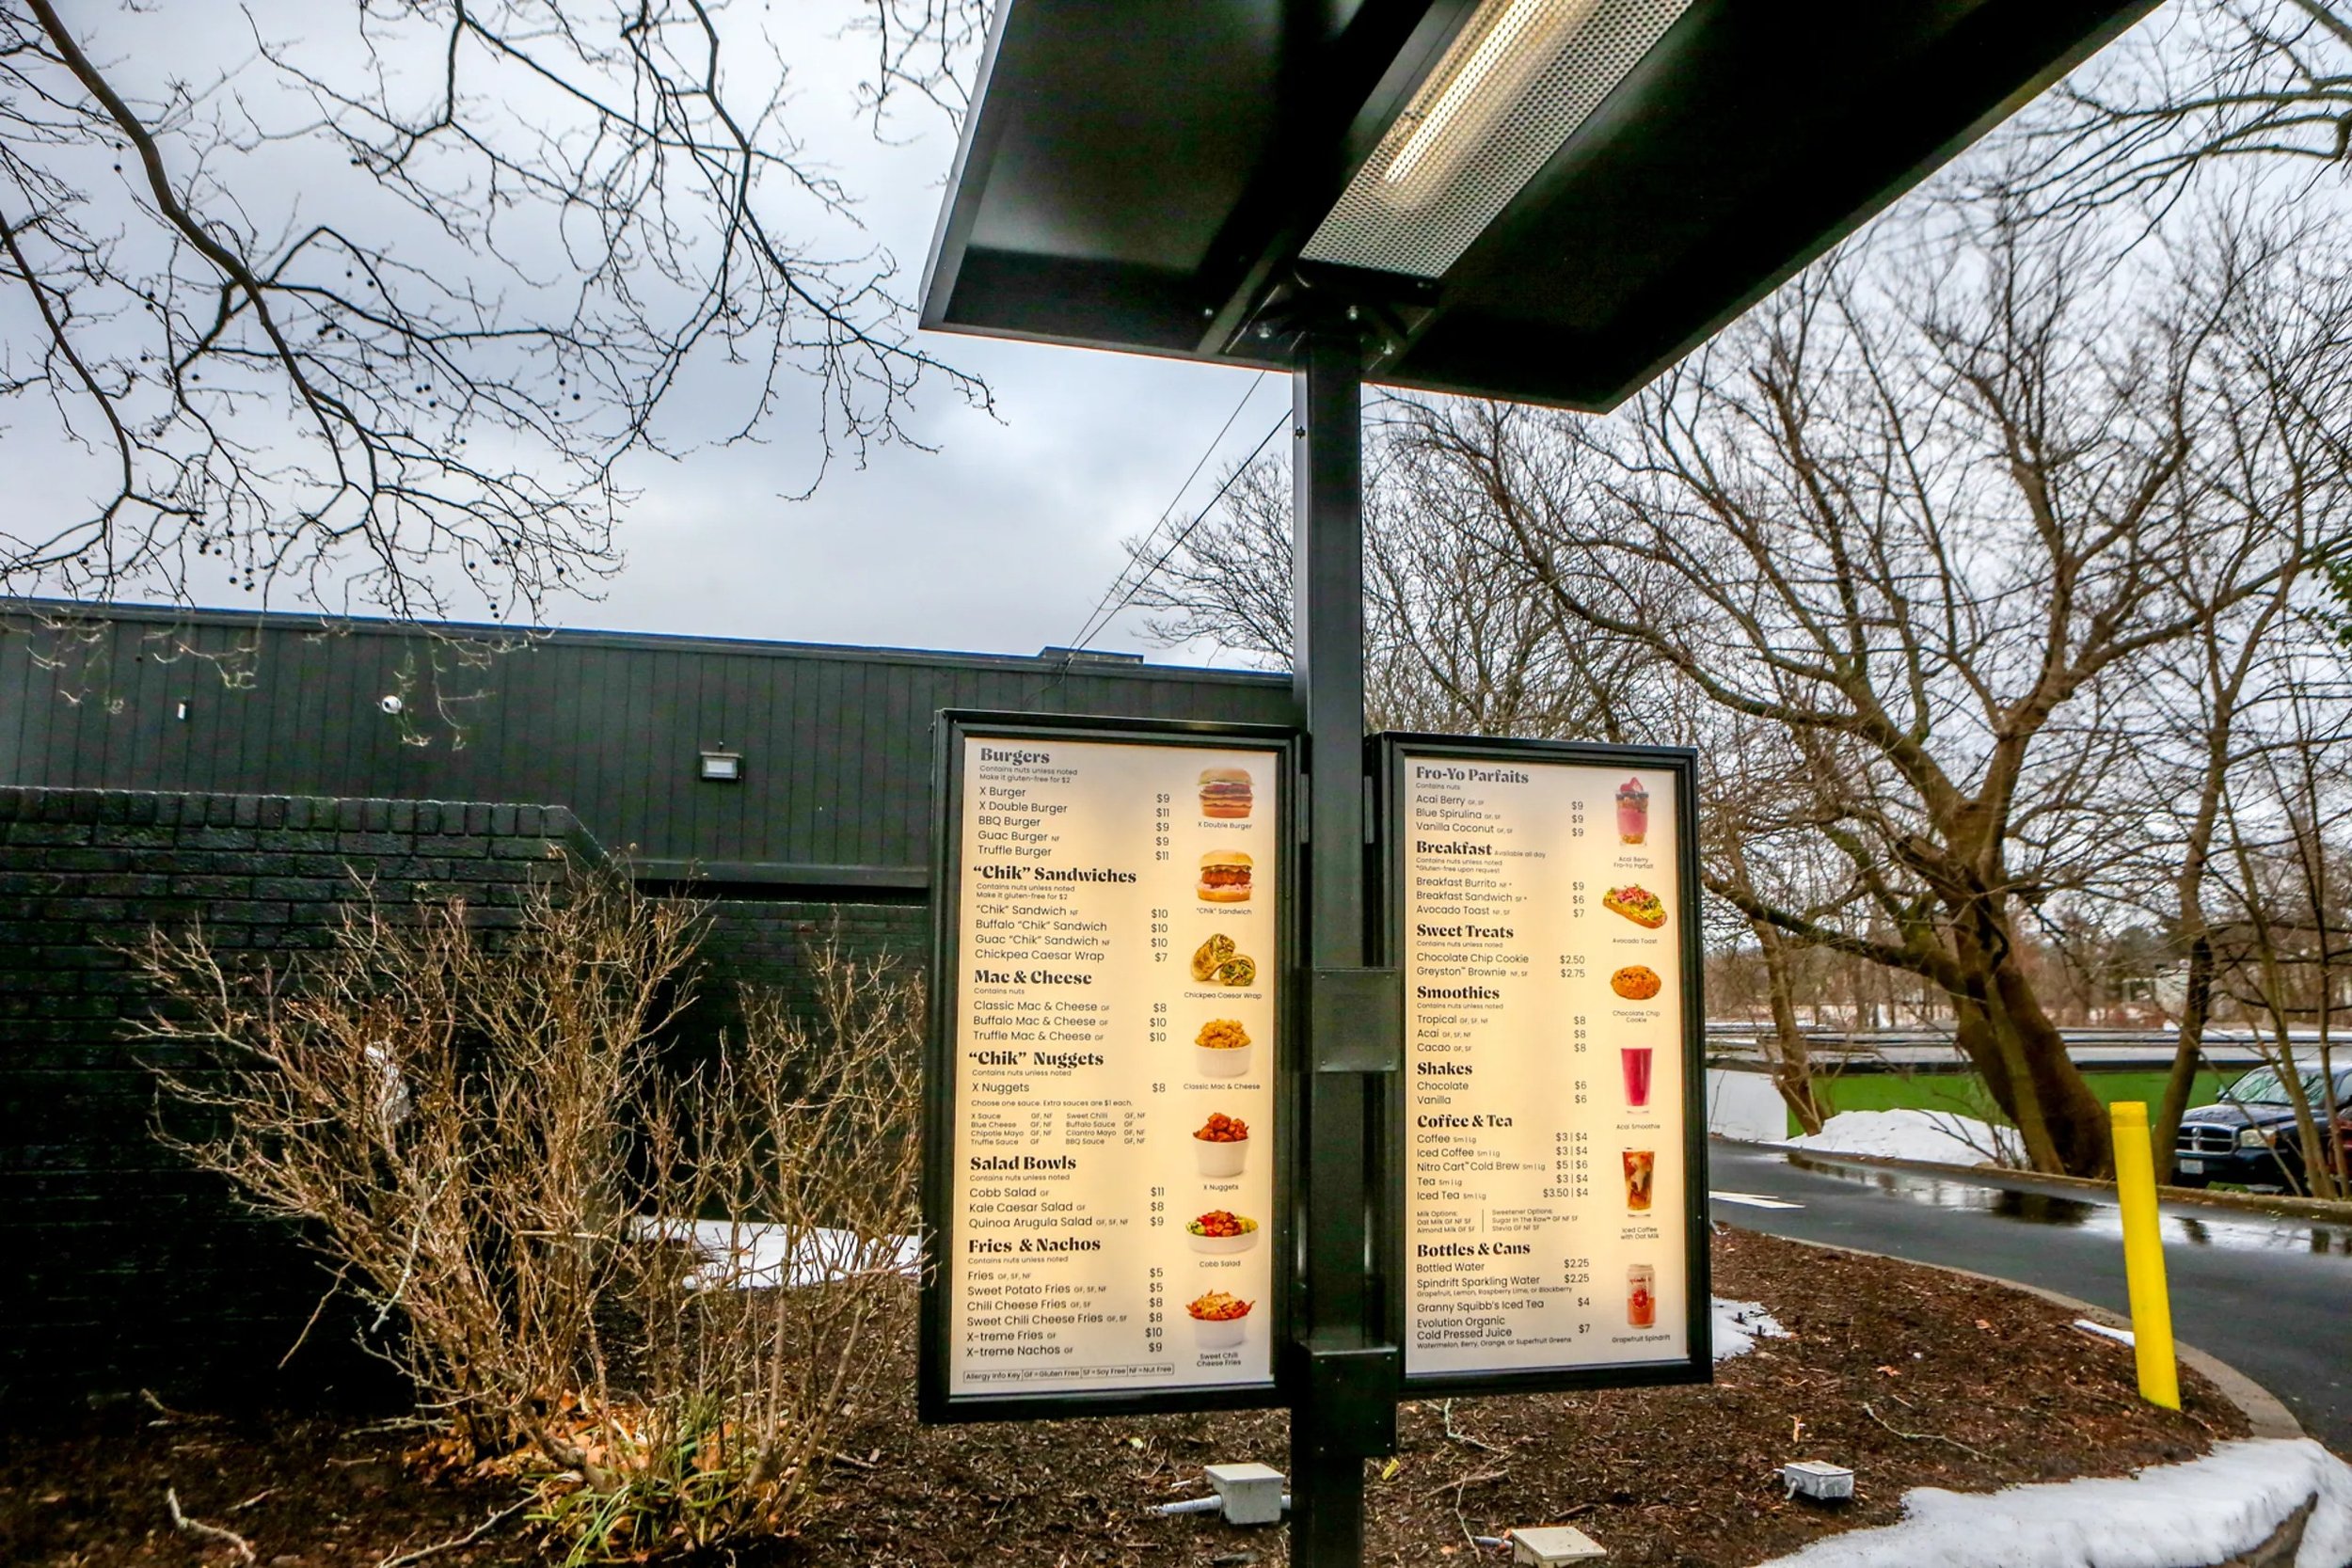  The former Burger King drive-thru signage has been utilized by Plant City X in Warwick. Photo credit David DelPoio, The Providence Journal 